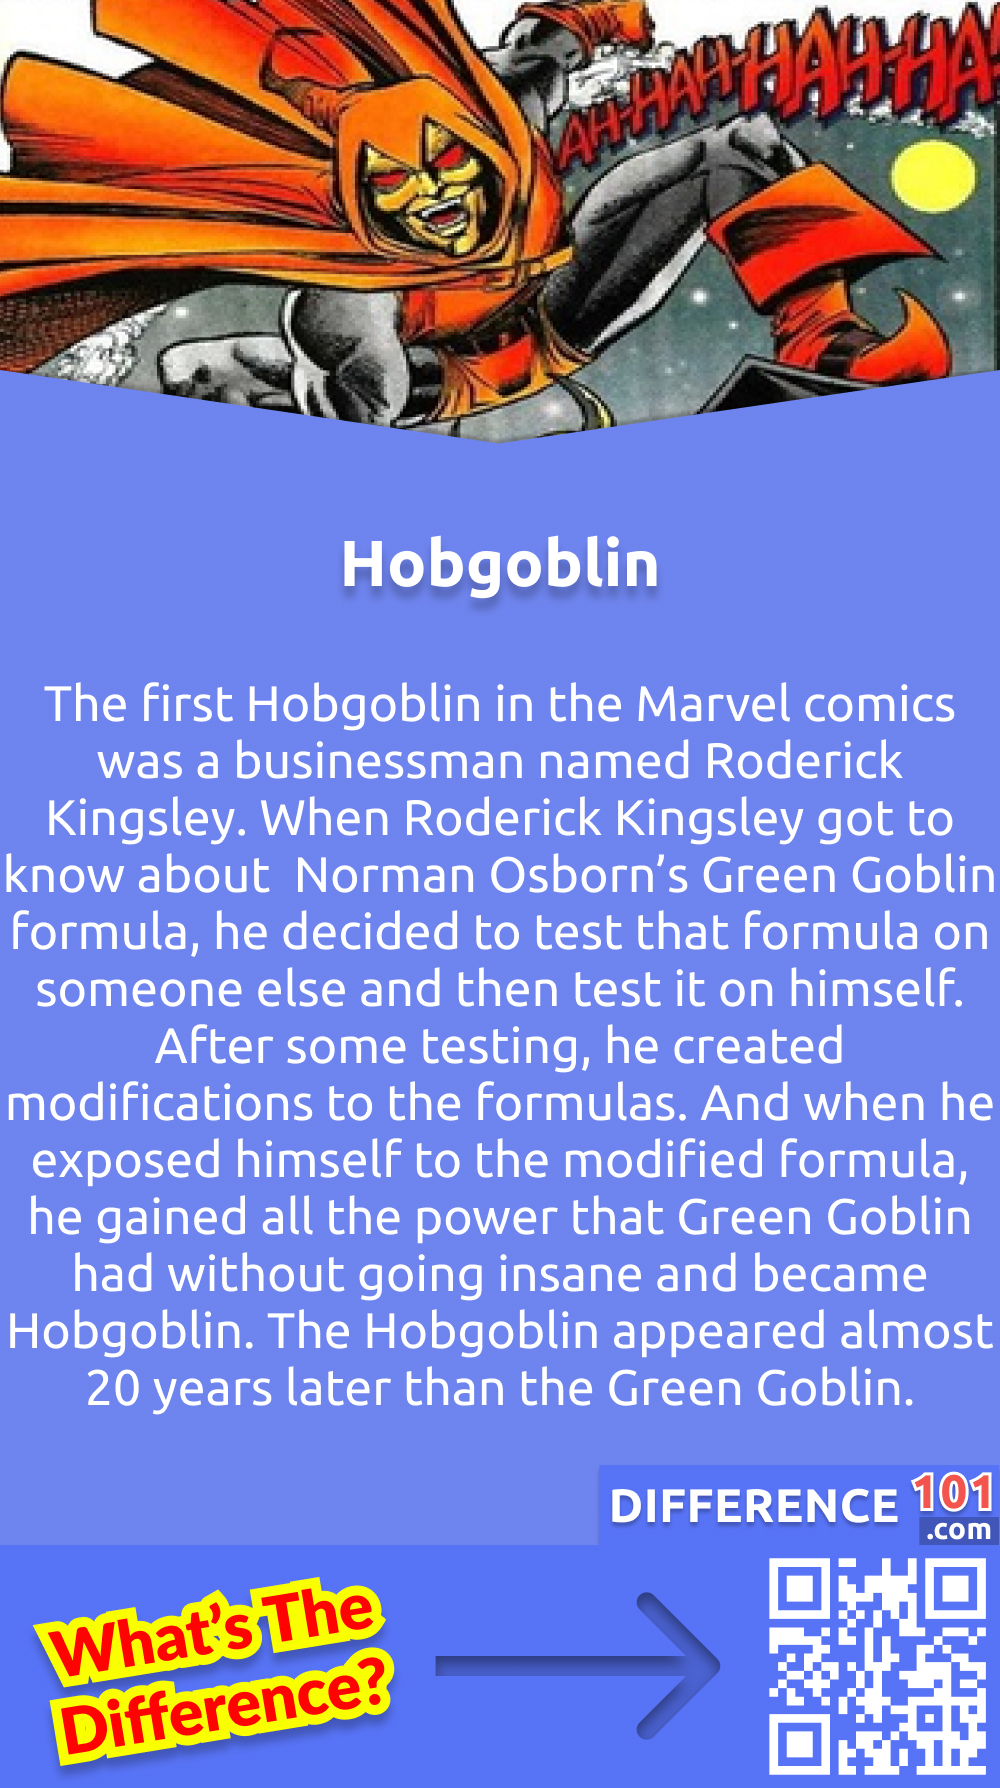 What Is a Hobgoblin? The first Hobgoblin in the Marvel comics was a businessman named Roderick Kingsley. He was a complete narcissist and would not stop at anything to get what he wanted. When Roderick Kingsley got to know about  Norman Osborn’s Green Goblin formula, he decided to test that formula on someone else and then test it on himself. After some testing, he created modifications to the formulas. And when he exposed himself to the modified formula, he gained all the power that Green Goblin had without going insane and became Hobgoblin. The Hobgoblin appeared almost 20 years later than the Green Goblin. Just because the writer did not want to resurrect the Green Goblin.